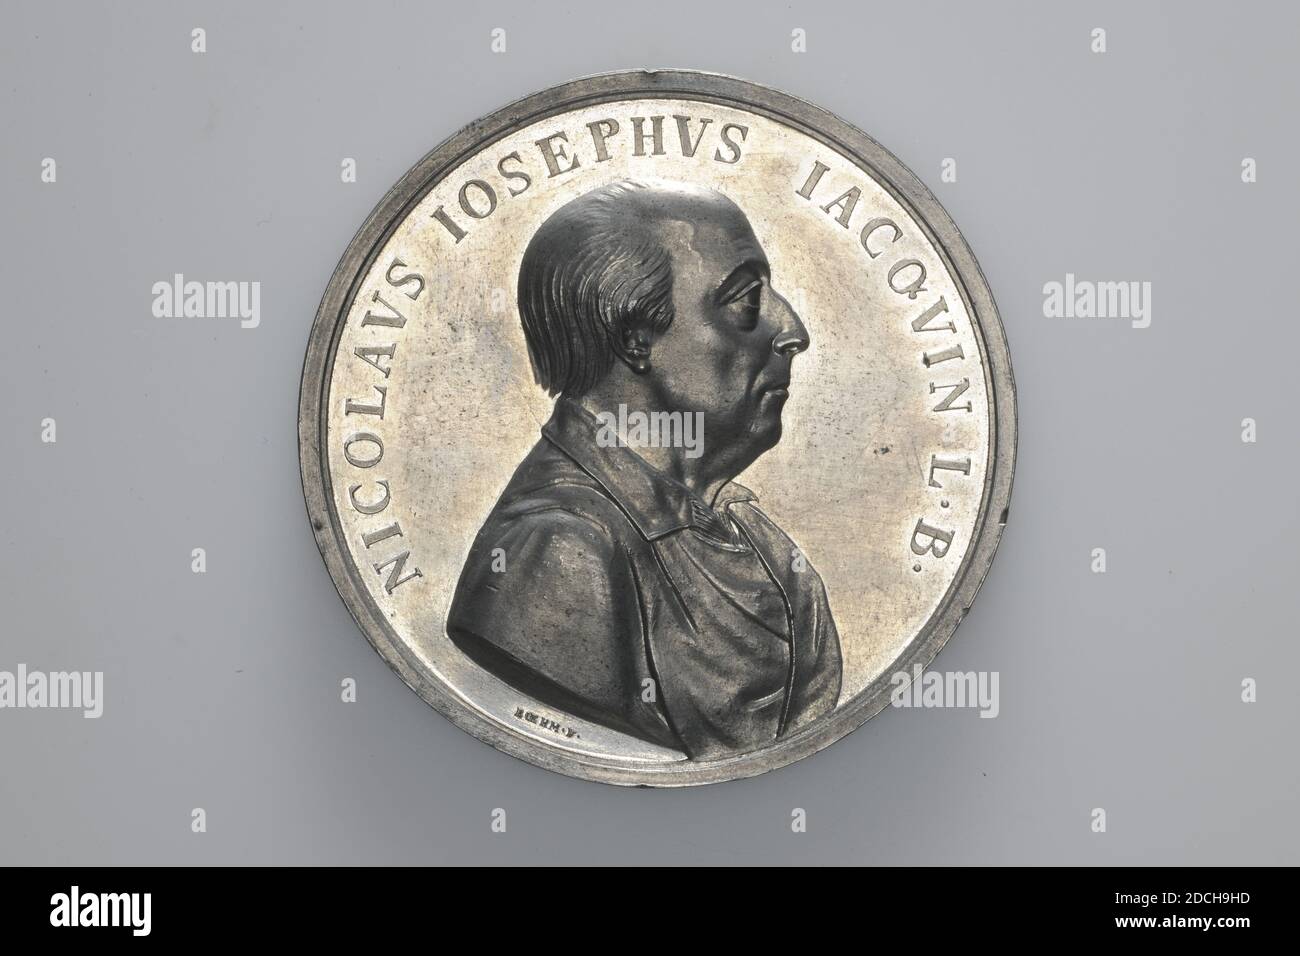 family token, Roehm, 1817, minted, General: 6.4 x 0.7cm 64 x 7mm, Weight: 85g, trumpet, personification, man's portrait, bust, Funeral token in honor of Baron N.J. Jacquin, 1727-1817. Medic, chemist and botanist. The front features a right-facing bust of Baron N.J. Jacquin and profil. Around it is the circular: NICOLAUS IOSEPHUS IACQUIN LB. Under the shoulder in very small letters the name of the maker: Roehm F. On the reverse Kalliope standing by a tomb with a scroll in hand and a foot on the base of the tomb. On the right the flying fame with a trumpet. In the middle of the tomb a snake that Stock Photo